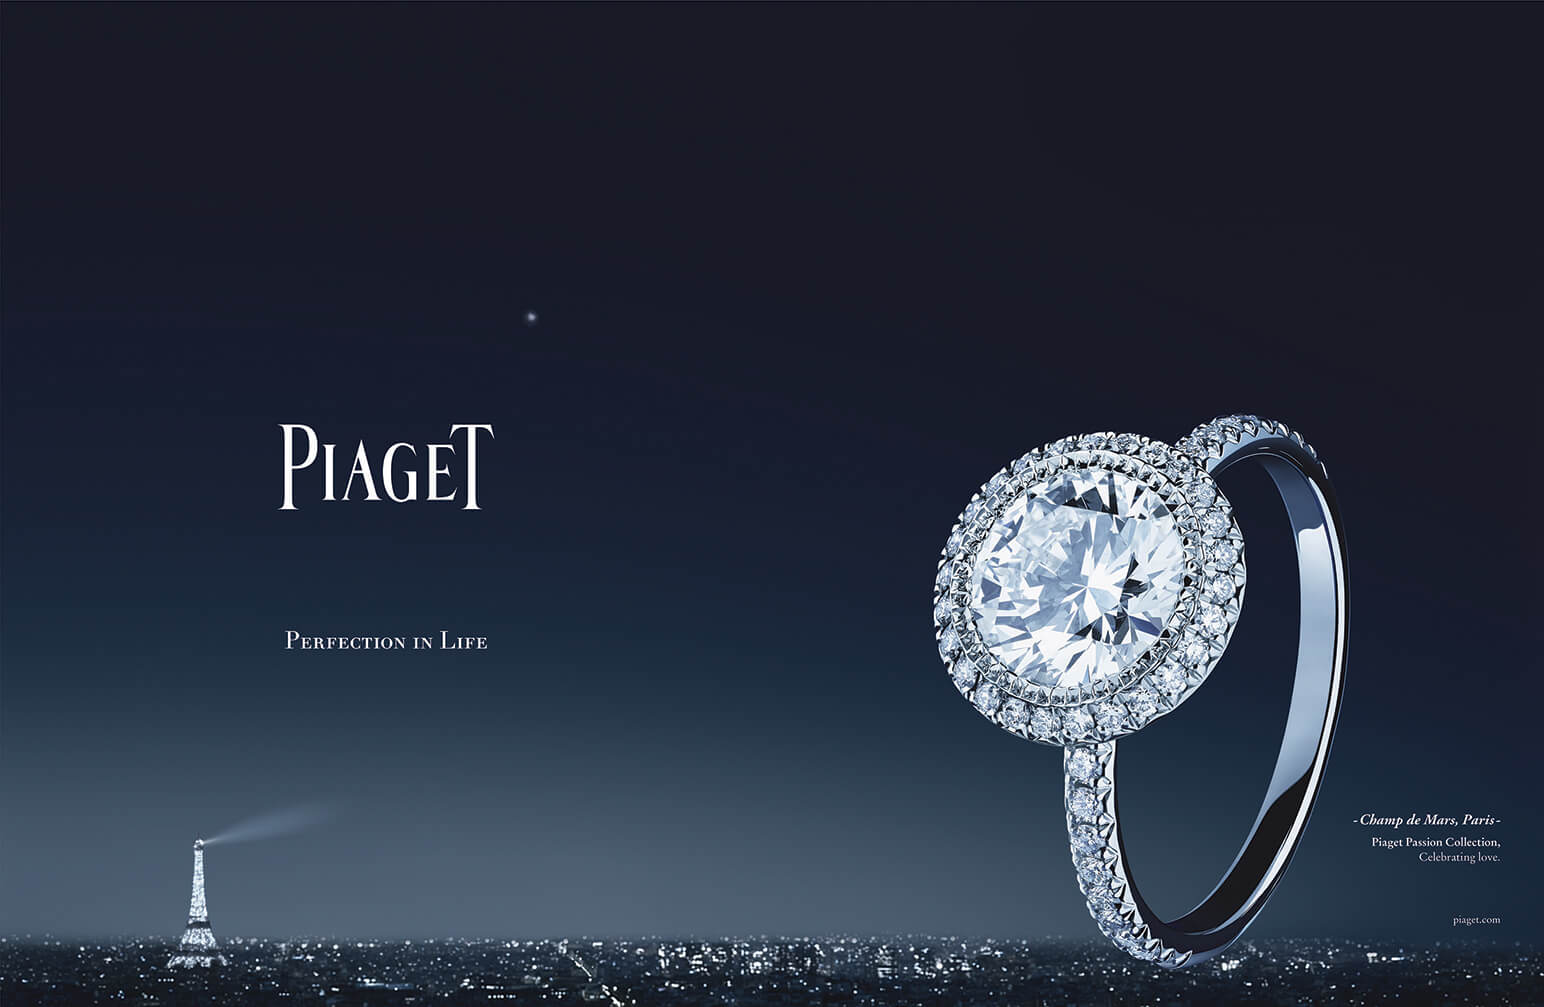 Piaget Perfection In Life Fhh Journal